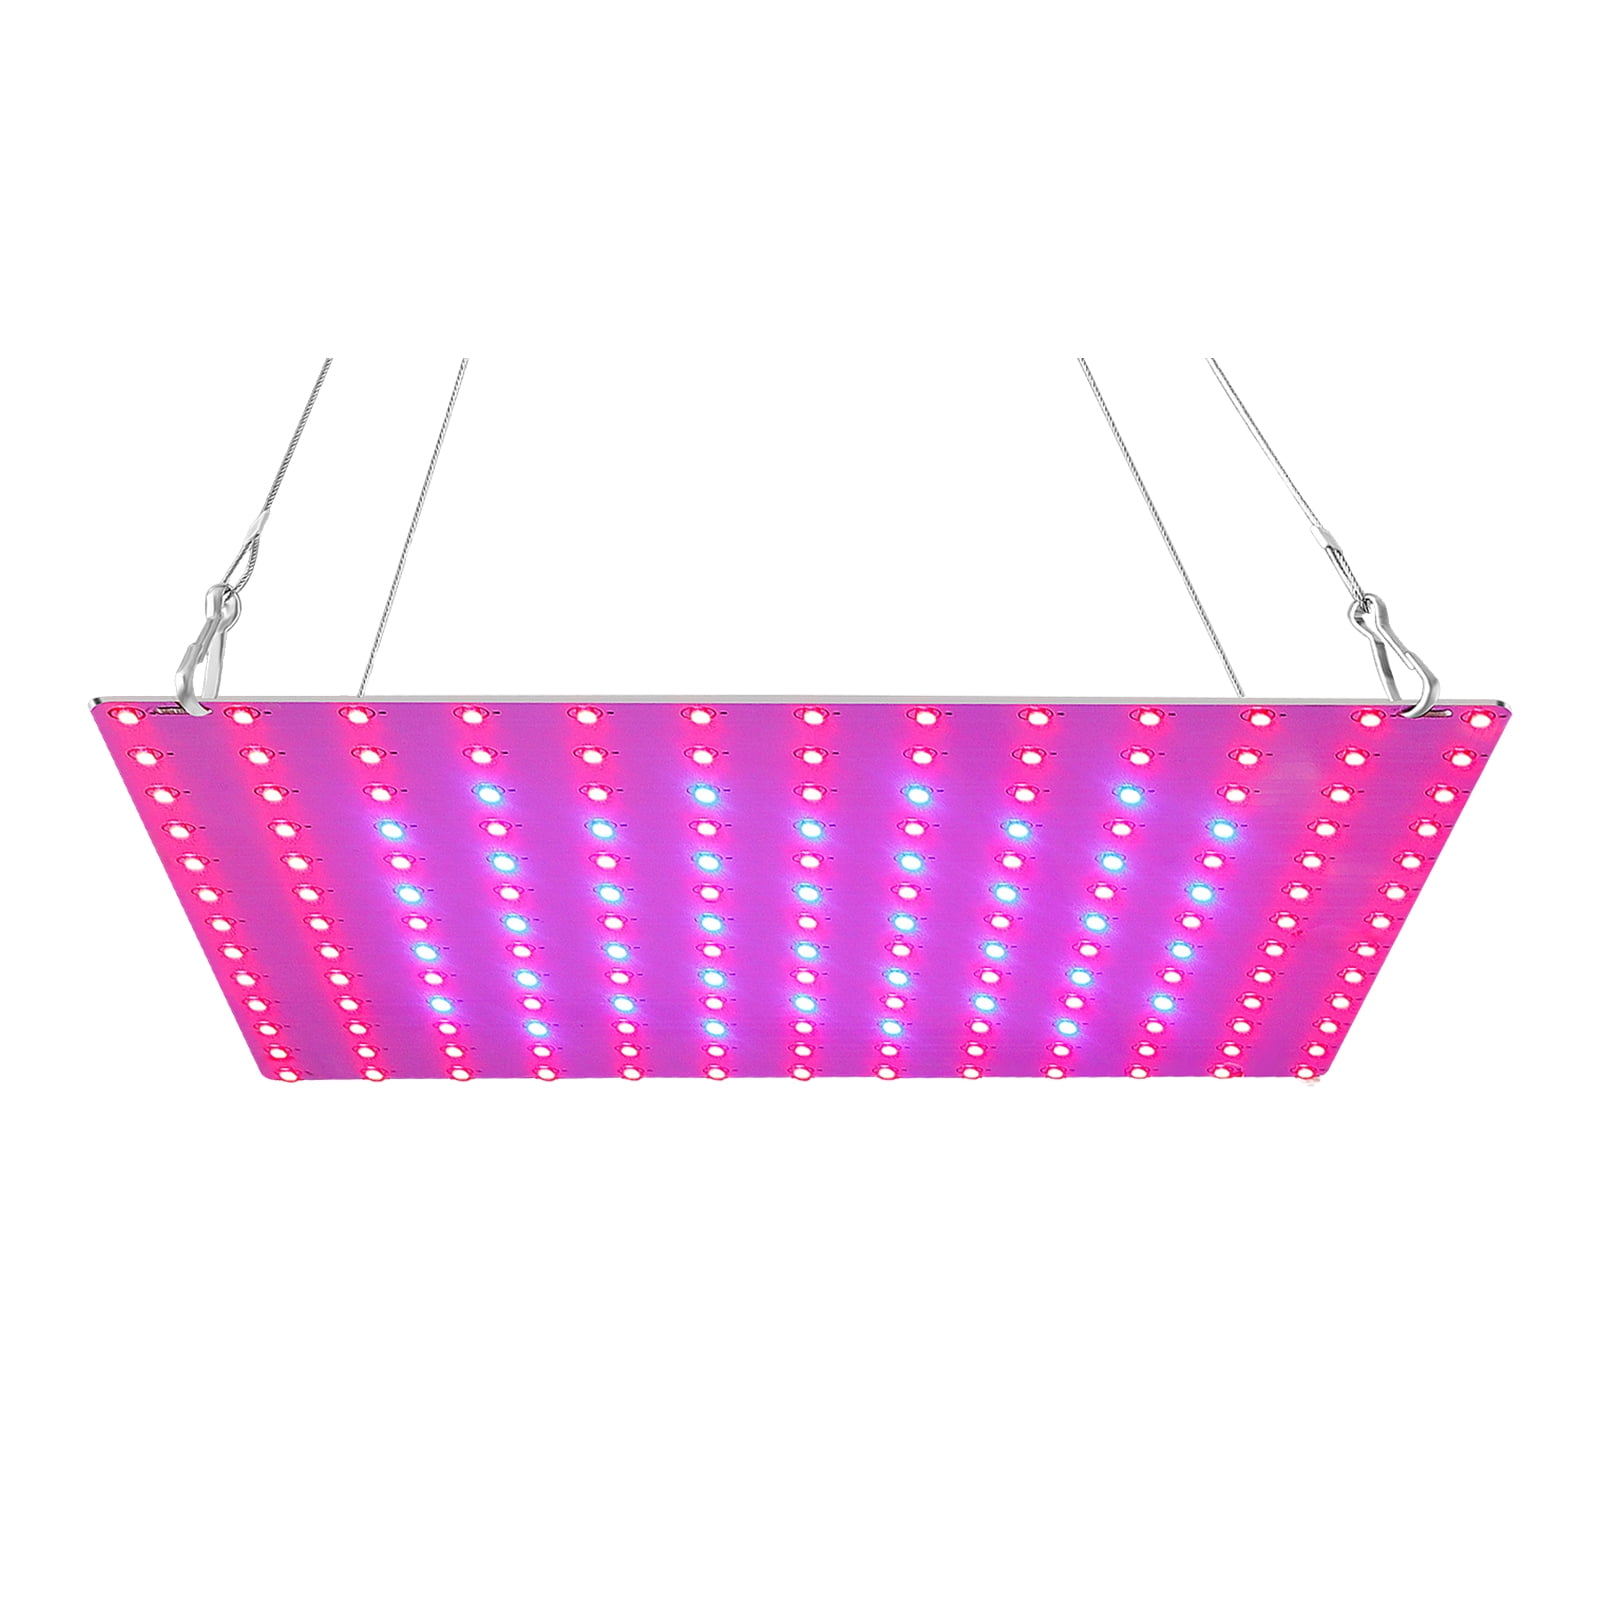 Details about   100W LED Grow Light Full Spectrum Flower Bloom Hydroponic Indoor Plant Veg Lamp 